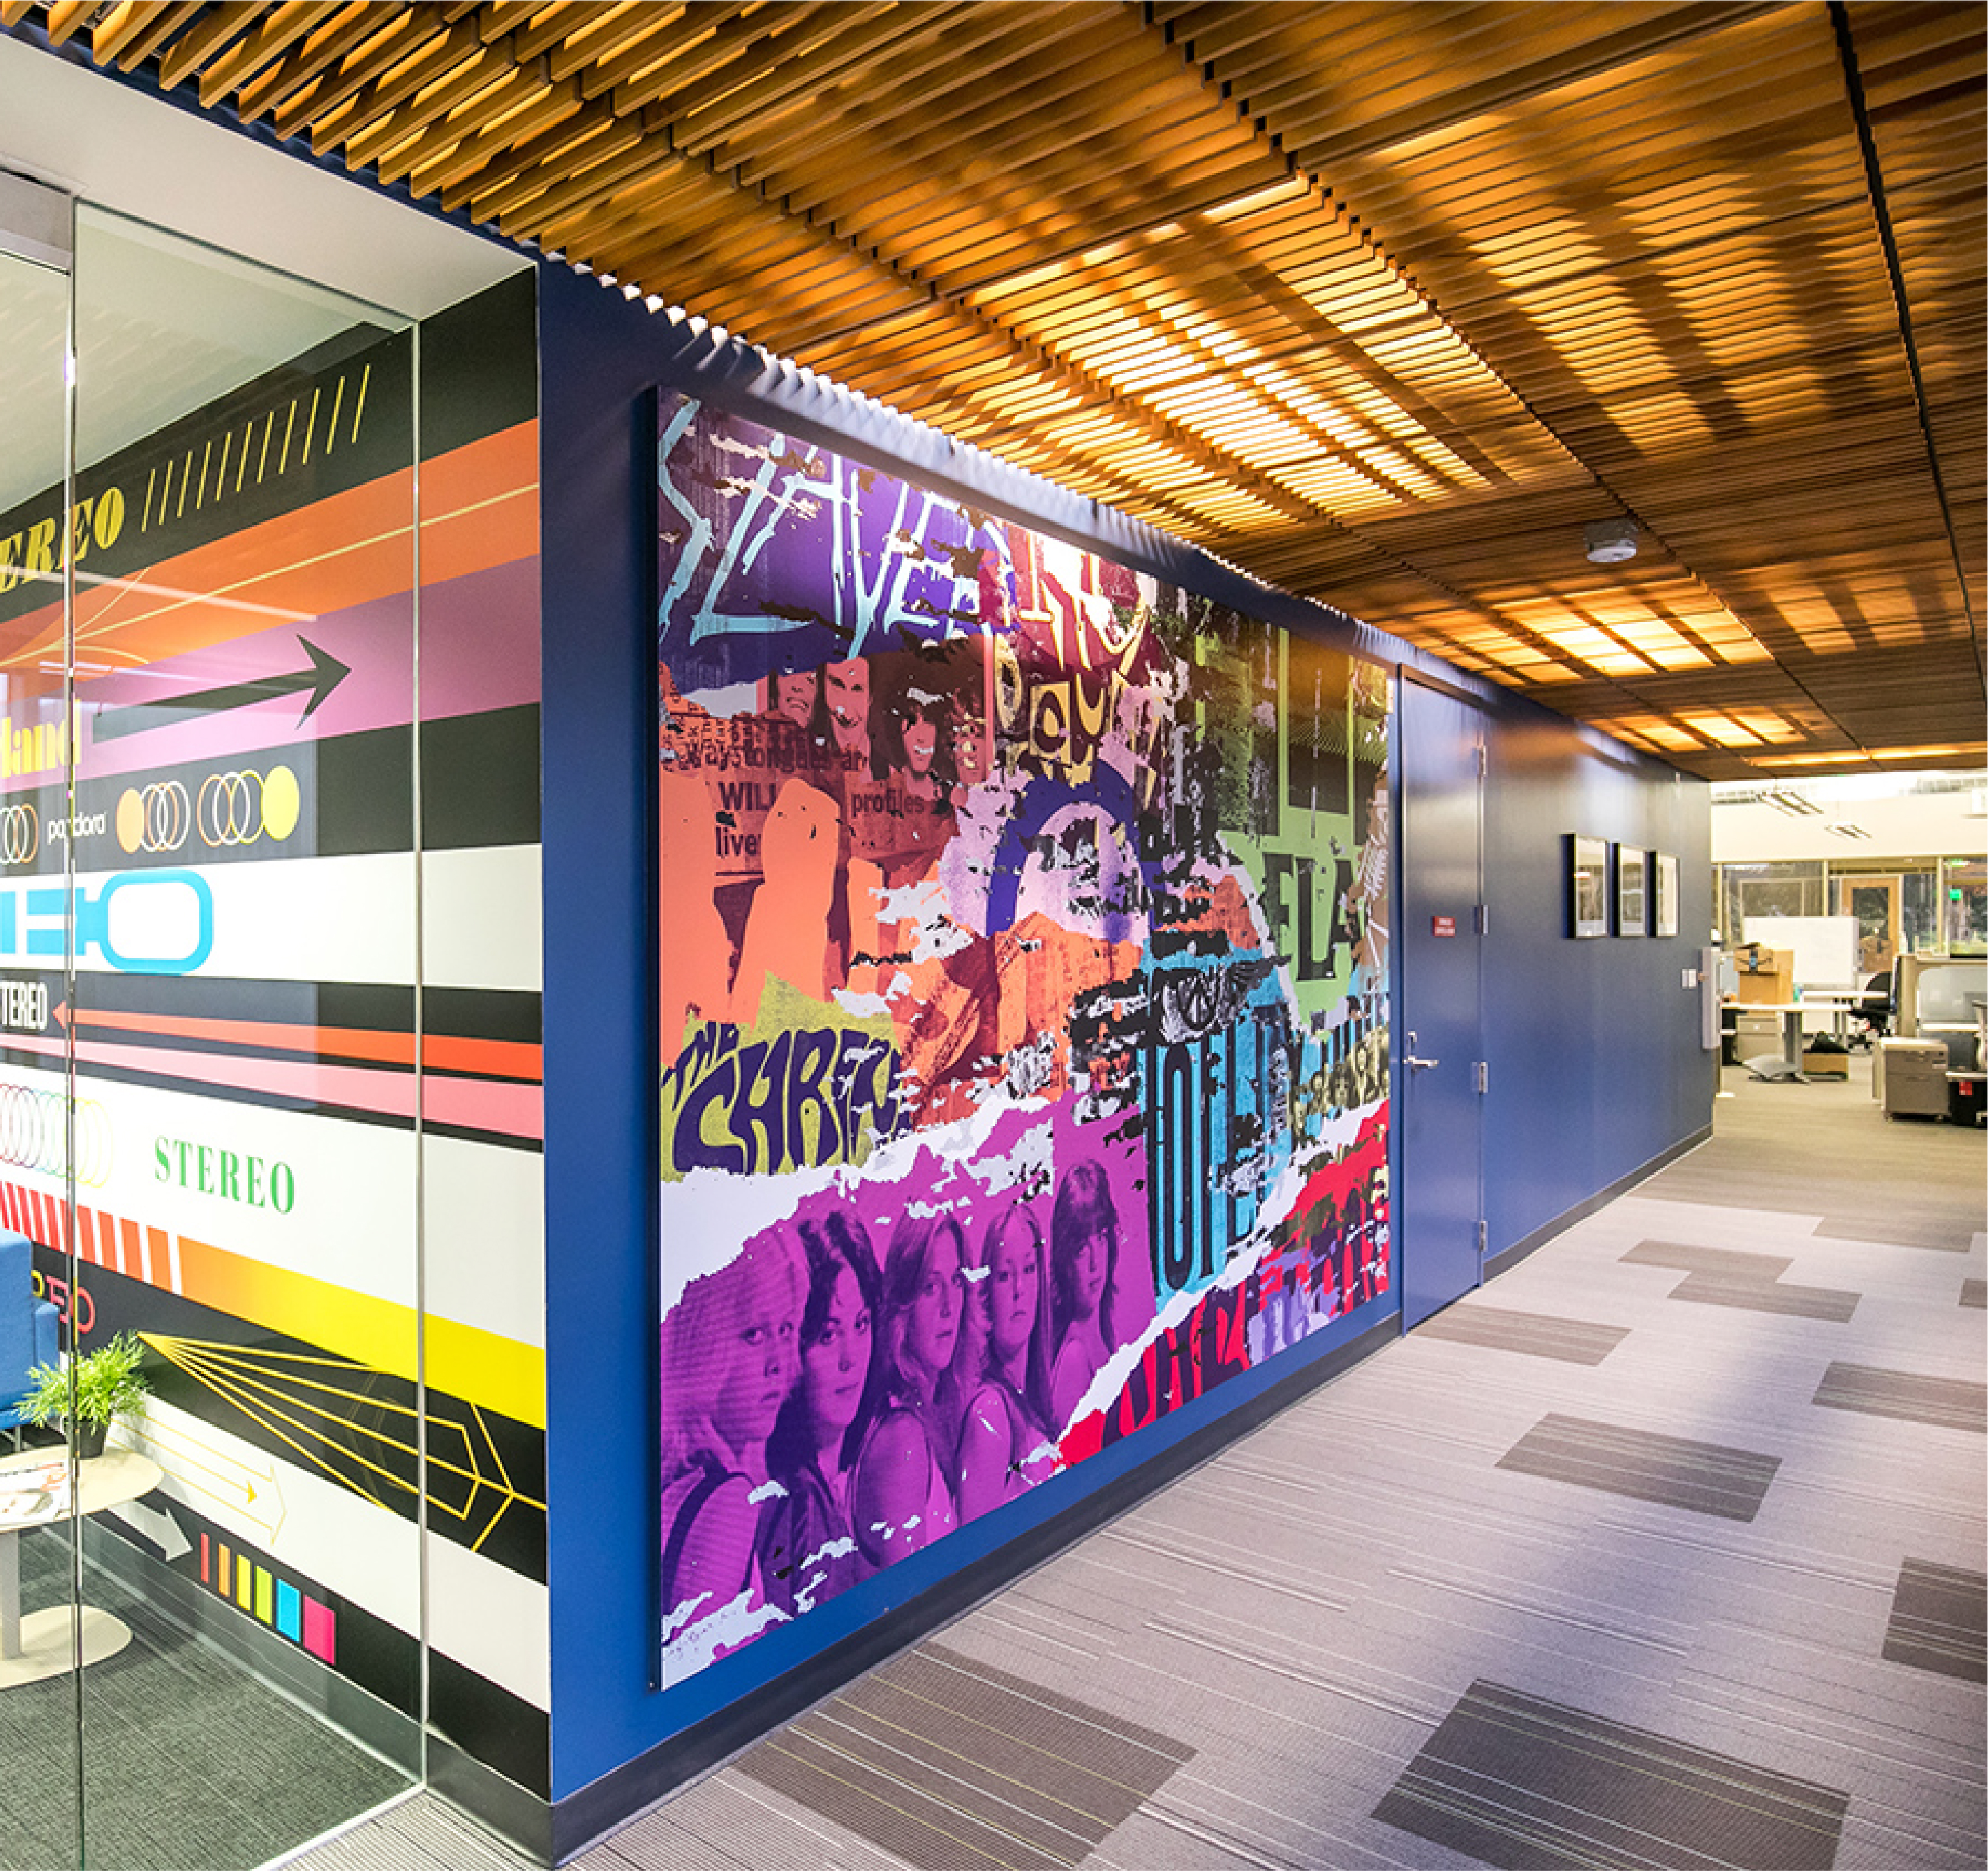 Corporate office installation with graphic design walls